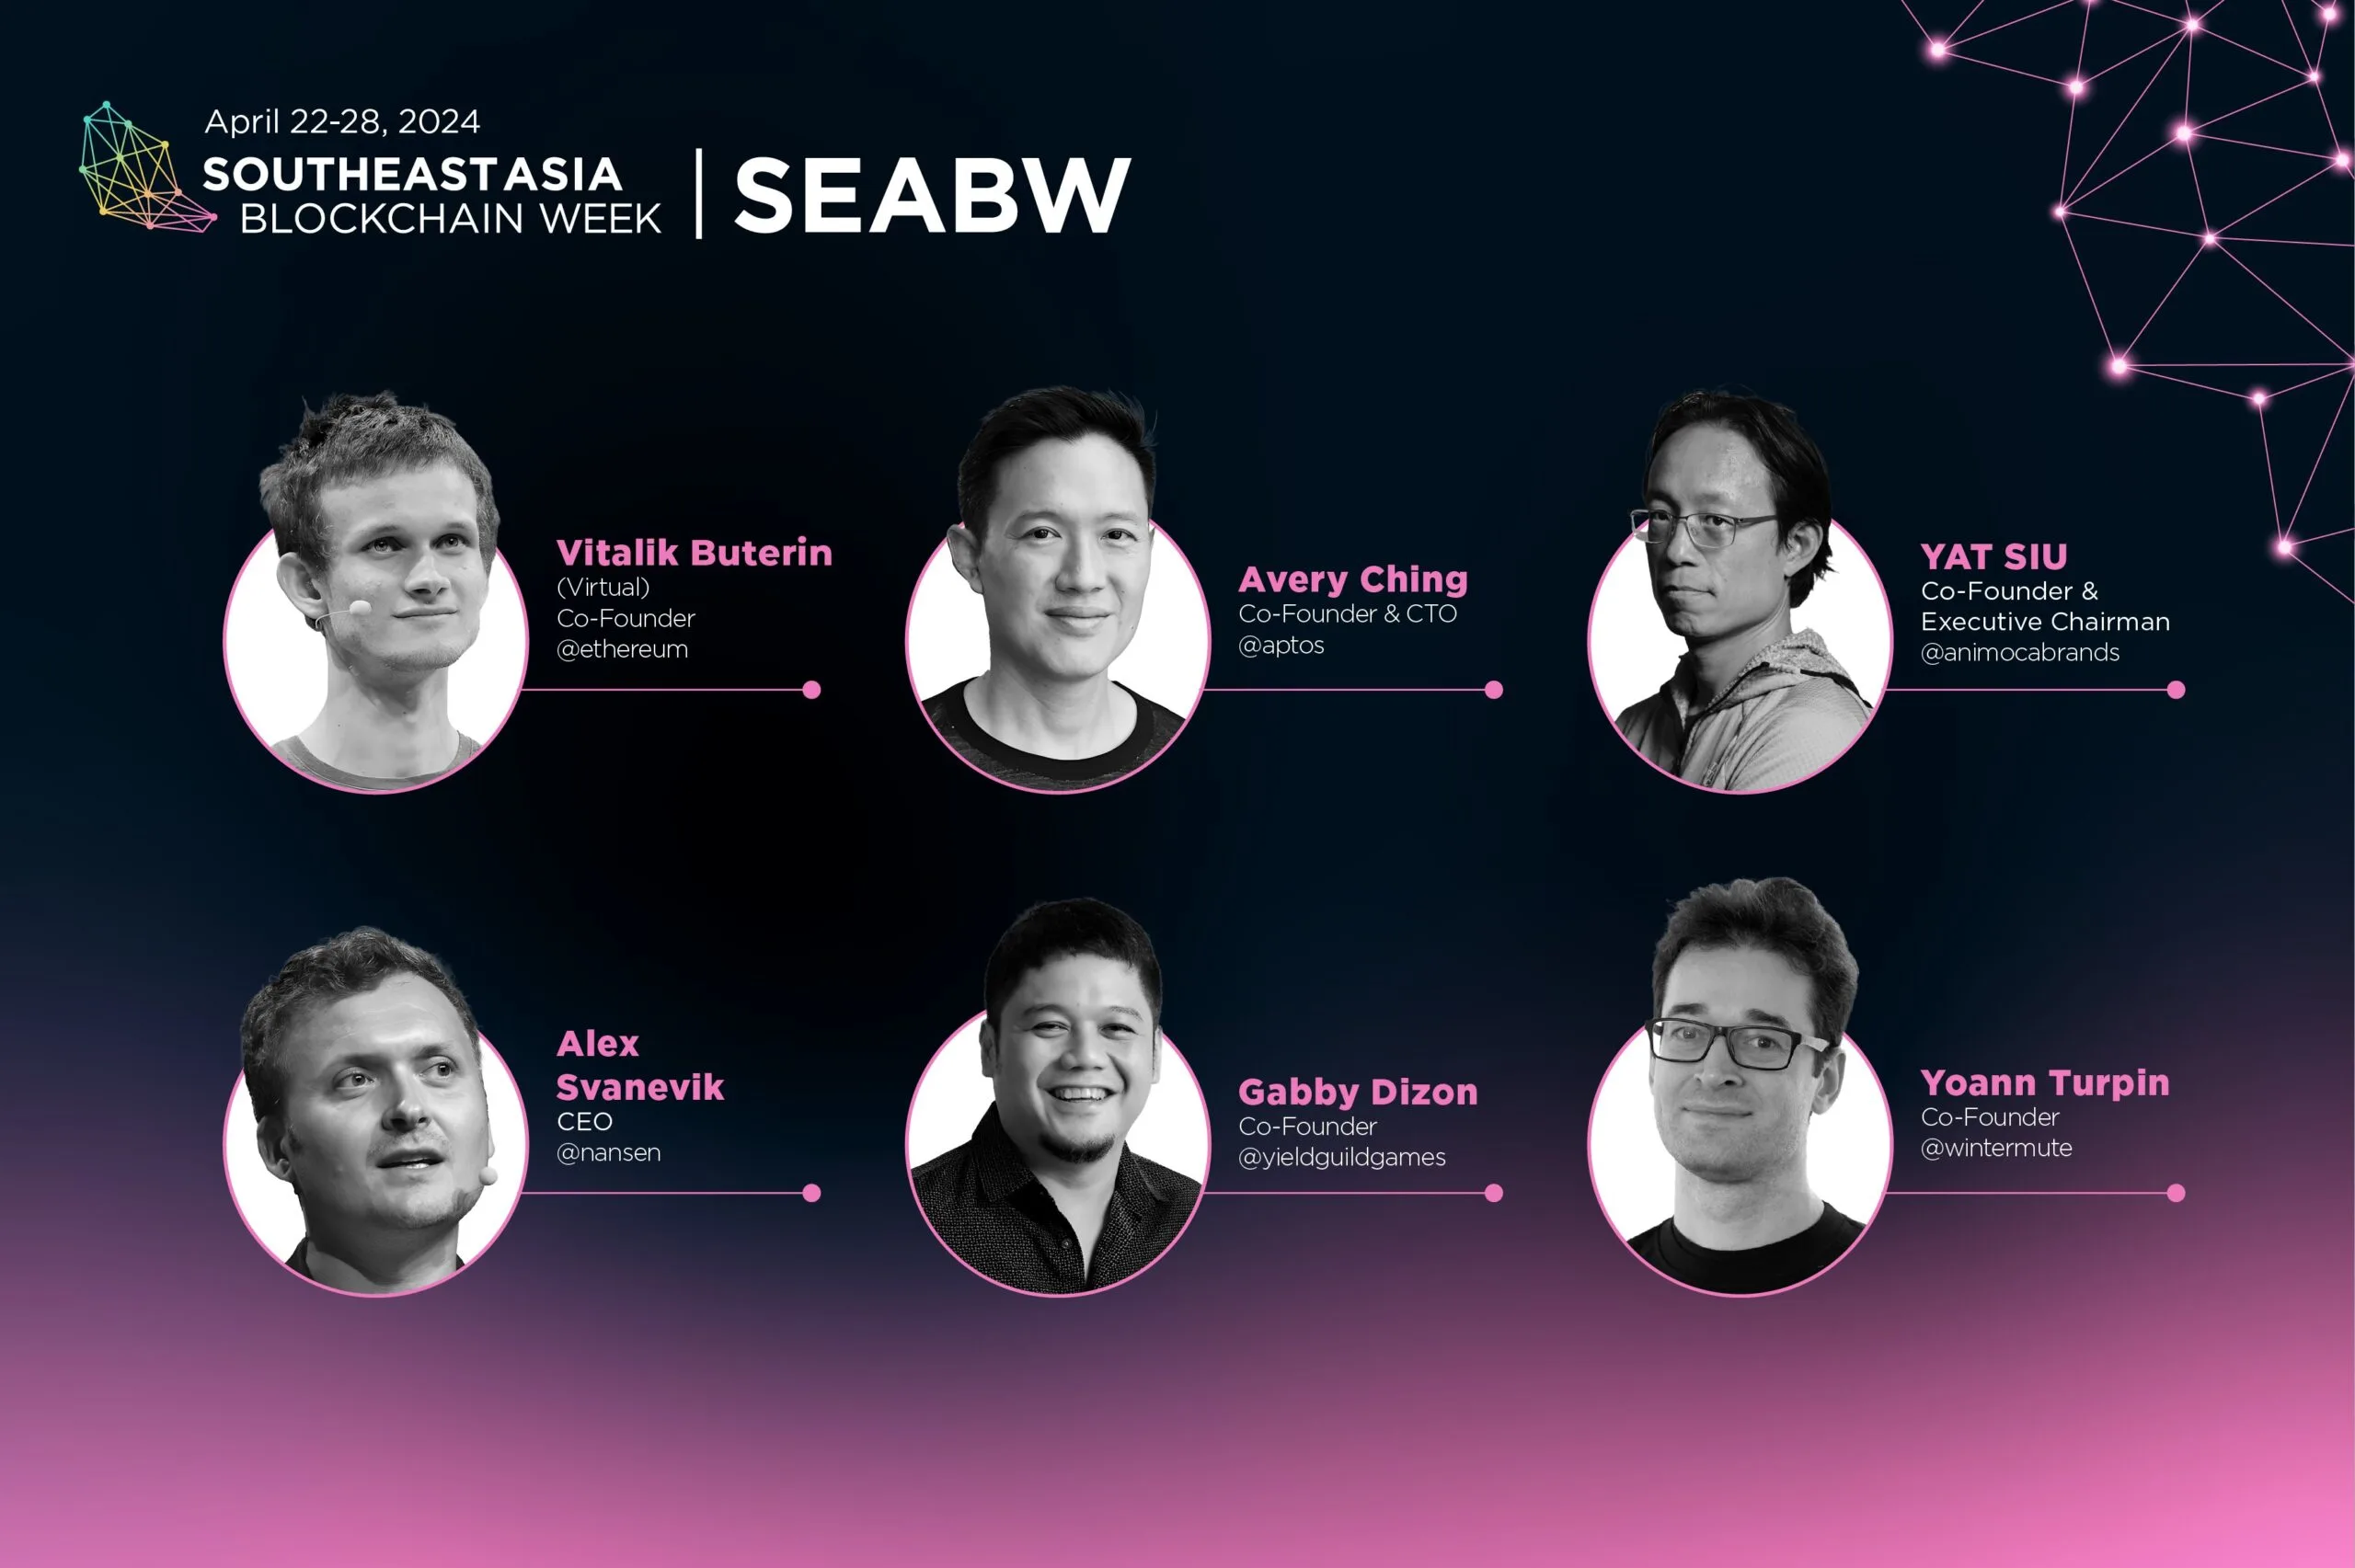 Ether Founder Vitalik and Aptos Co-Founder Avery Ching to Present at SEABW2024